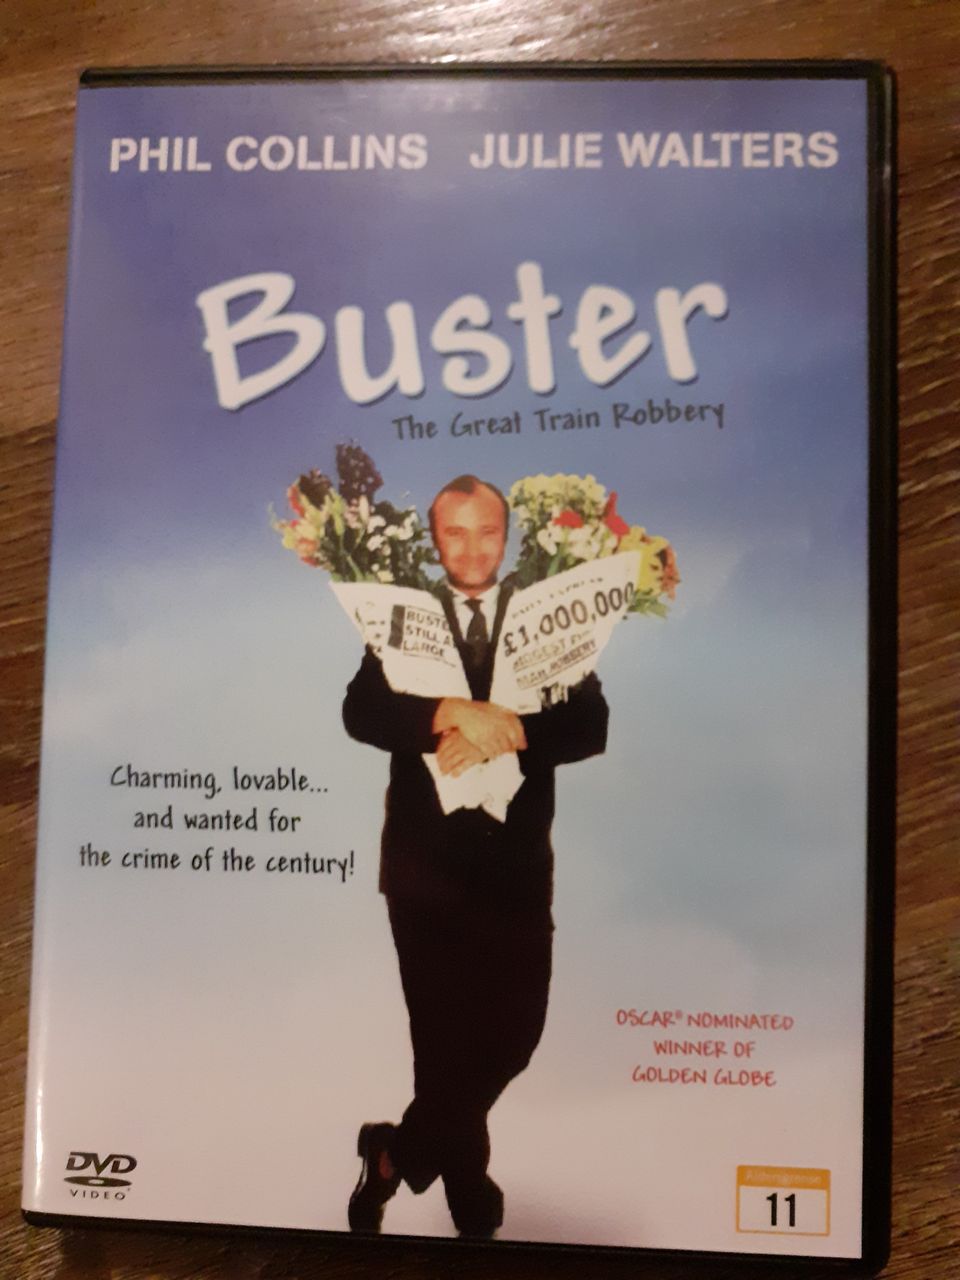 Buster - the great train robbery